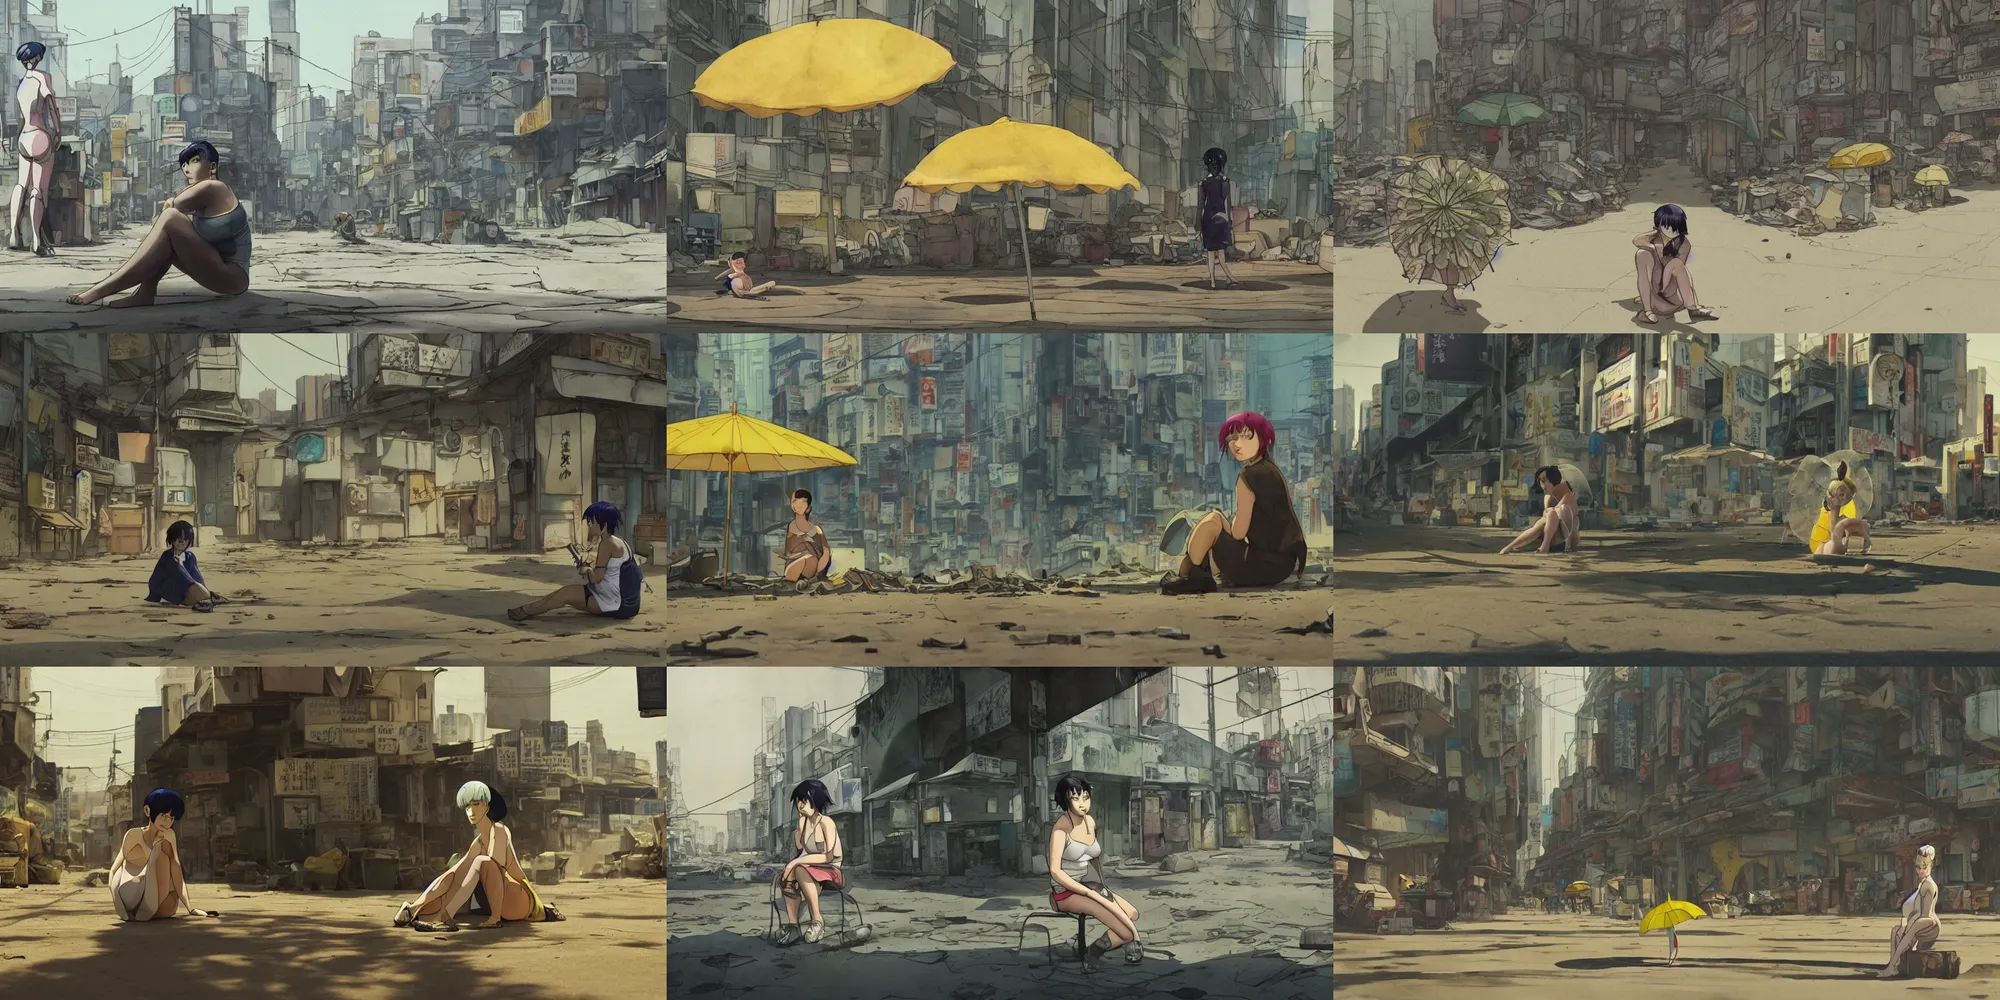 Prompt: incredible curvilinear screenshot, simple curvilinear watercolor, paper texture, ghost in the shell movie scene, distant curvilinear shot of girl side view sitting under a yellow striped parasol in deserted dusty curvilinear shinjuku junk town, old pawn shop, bright sun bleached ground ,scary chameleon face muscle robot monster lurks in the background, ghost mask, teeth, animatronic, black smoke, pale beige sky, junk tv, texture, strange, impossible curvilinear perspective, fur, spines, mouth, pipe brain, shell, brown mud, dust, bored expression, overhead wires, telephone pole, dusty, dry, curvilinear pencil marks, shinjuku, katsuya terada, masamune shirow, tatsuyuki tanaka hd, 4k, remaster, dynamic camera angle, deep 3 point perspective, fish eye, dynamic scene